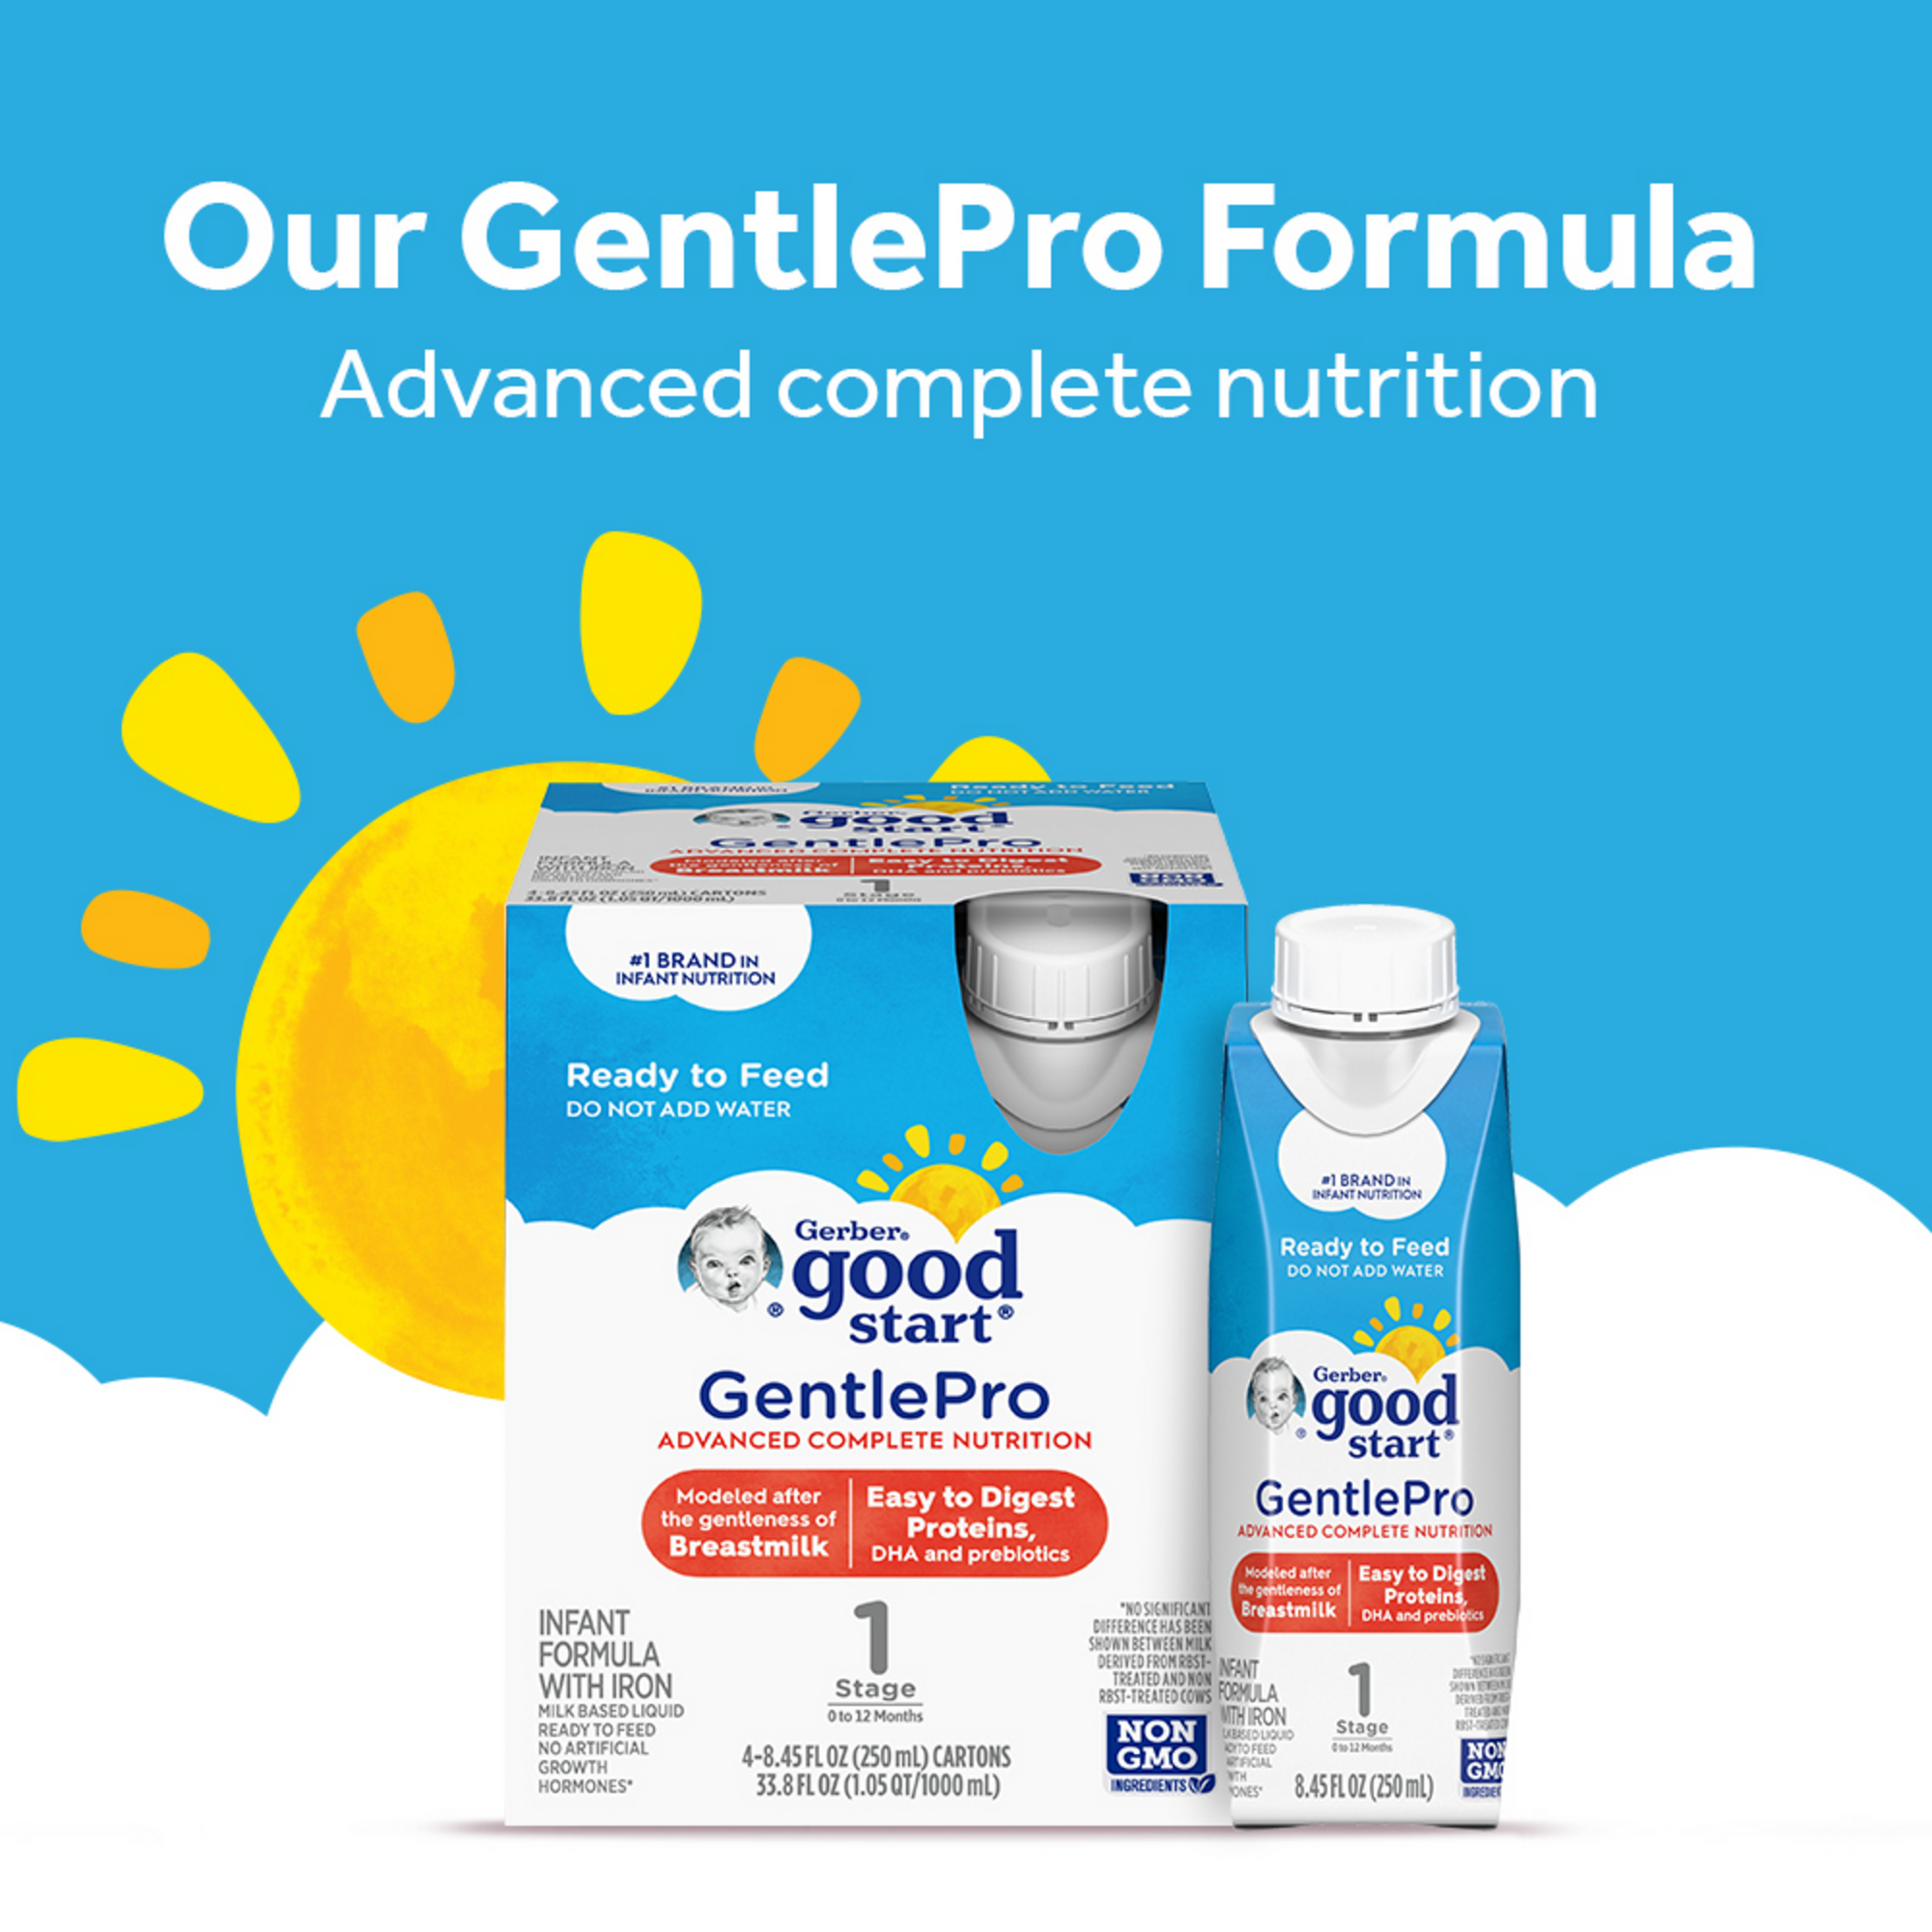 Gerber® Good Start® Gentle Pro Ready to Feed Infant Formula, 6x 8.45 oz. Our GentlePro Formula, advanced complete nutrition